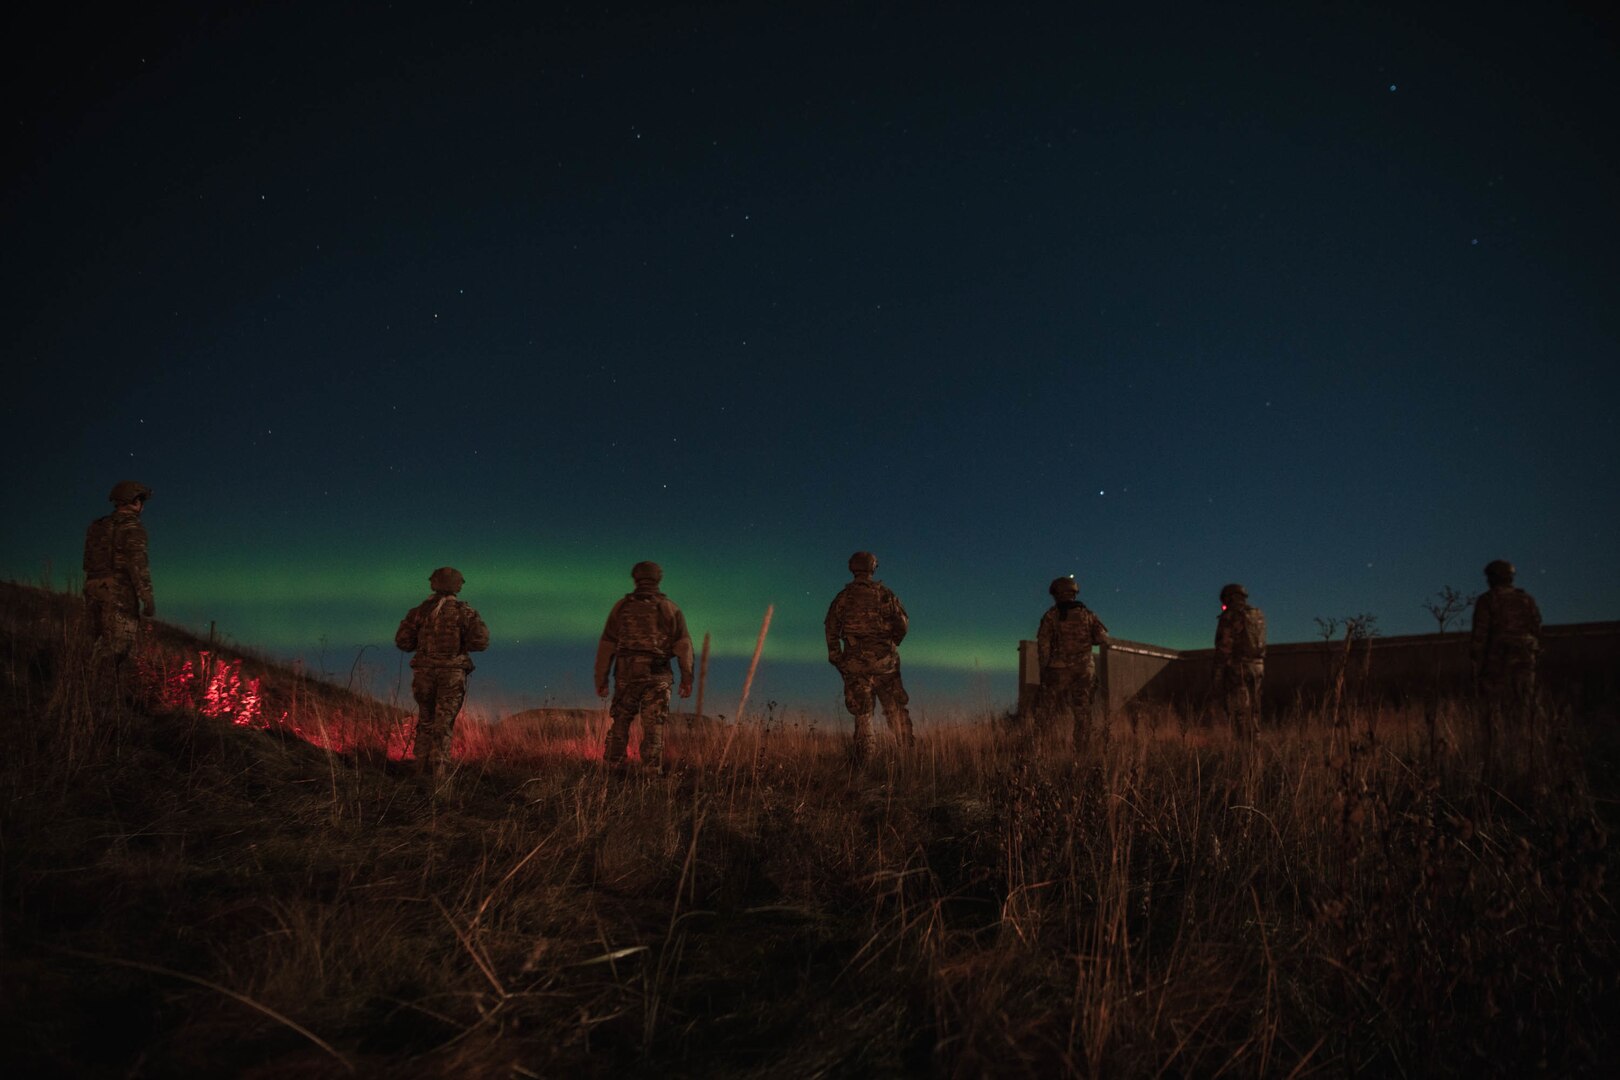 Members of the 137th Mission Sustainment Team conduct an unexploded ordnance sweep during U.S. Special Operations Command Europe led ATREUS 22-4 at Andøya Space Defense Range, Norway, Nov. 8, 2022. This was the first time the multi-capable Airmen conducted their mission in a setting realistic to the austere environments they will encounter while supporting global SOF operations. (U.S. Air National Guard photo by Tech. Sgt. Brigette Waltermire)